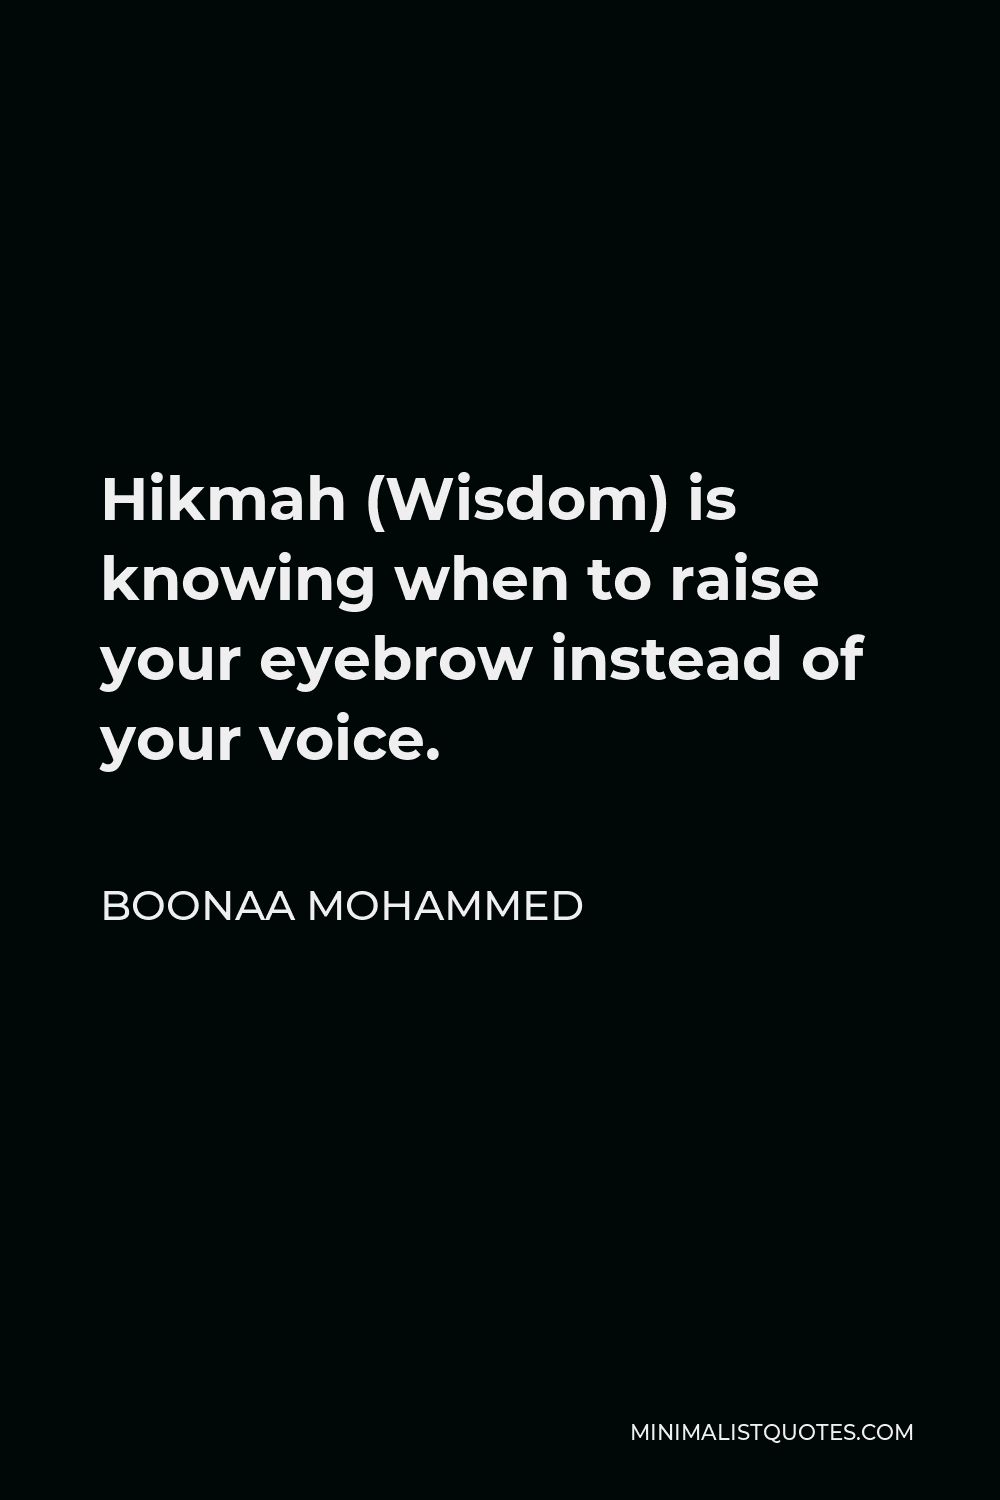 Boonaa Mohammed Quote - Hikmah (Wisdom) is knowing when to raise your eyebrow instead of your voice.